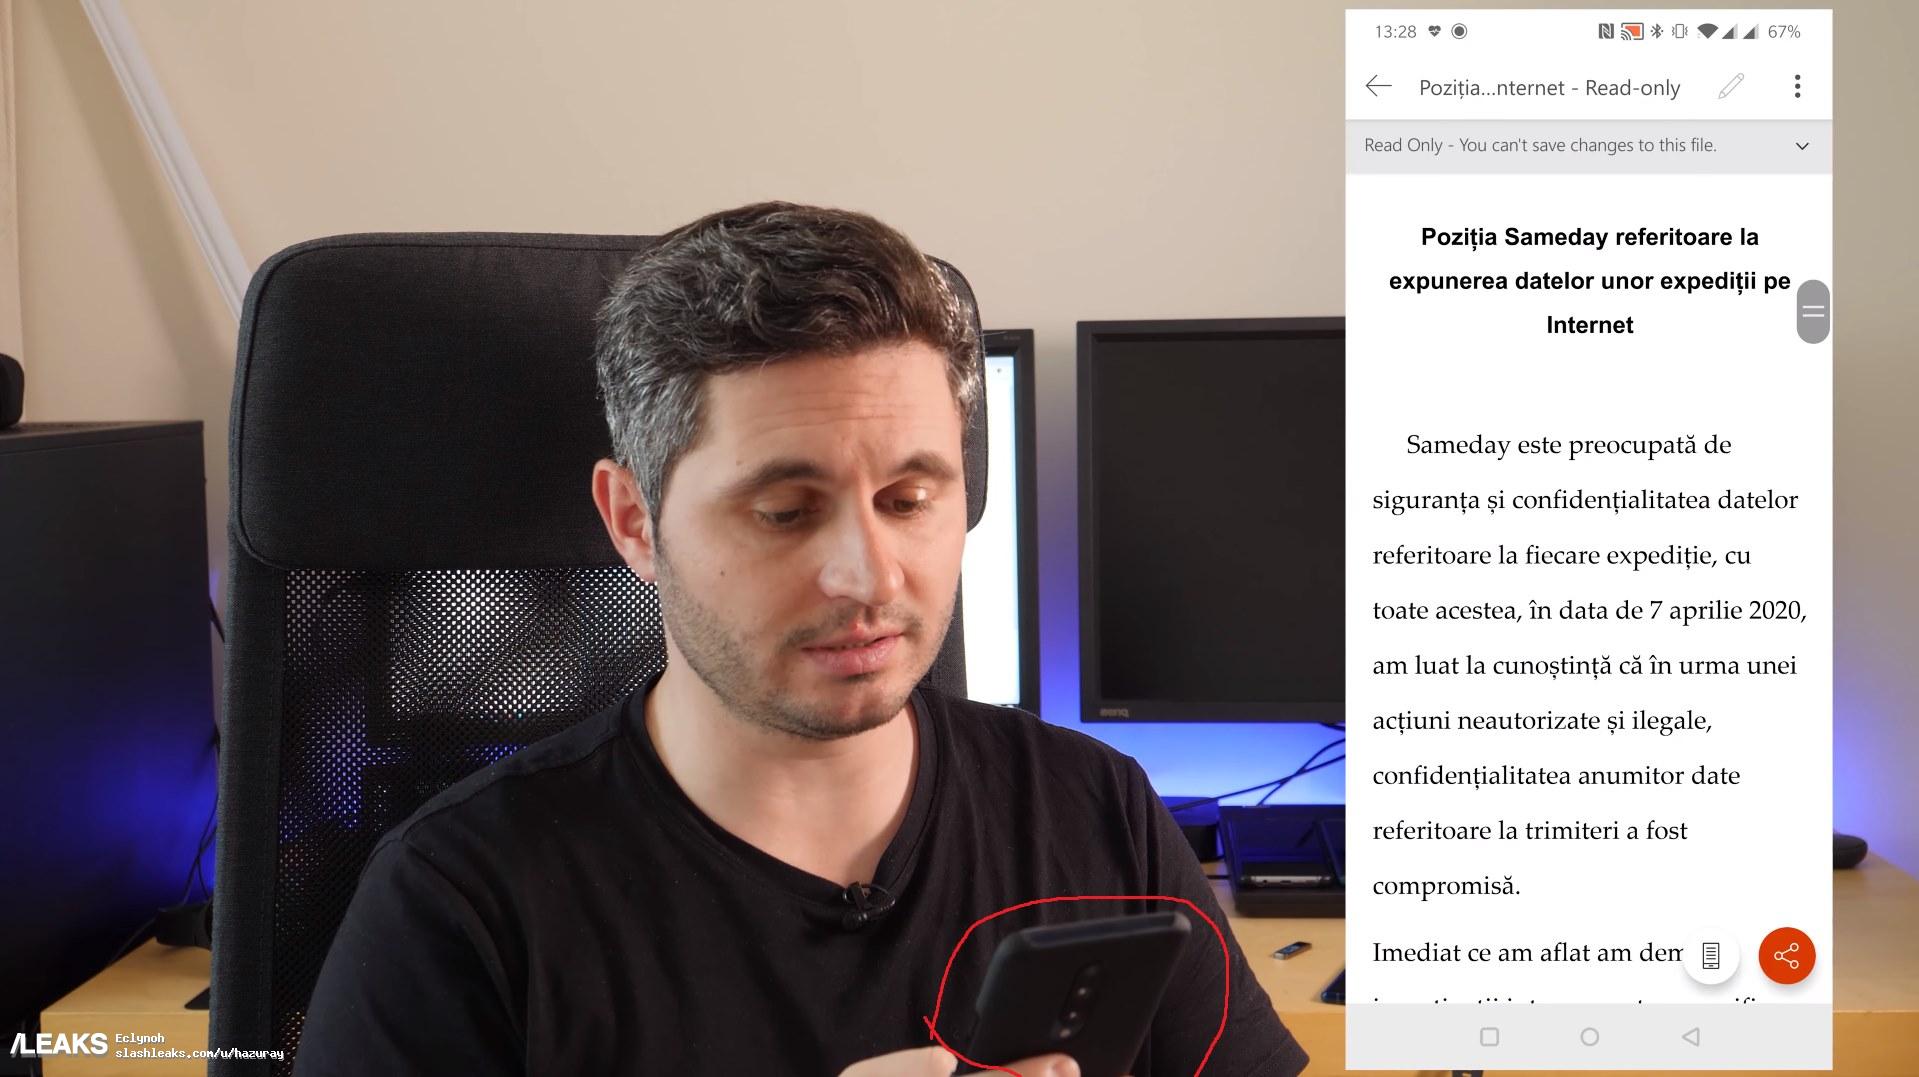 OnePlus 8 Spotted on YouTube Video